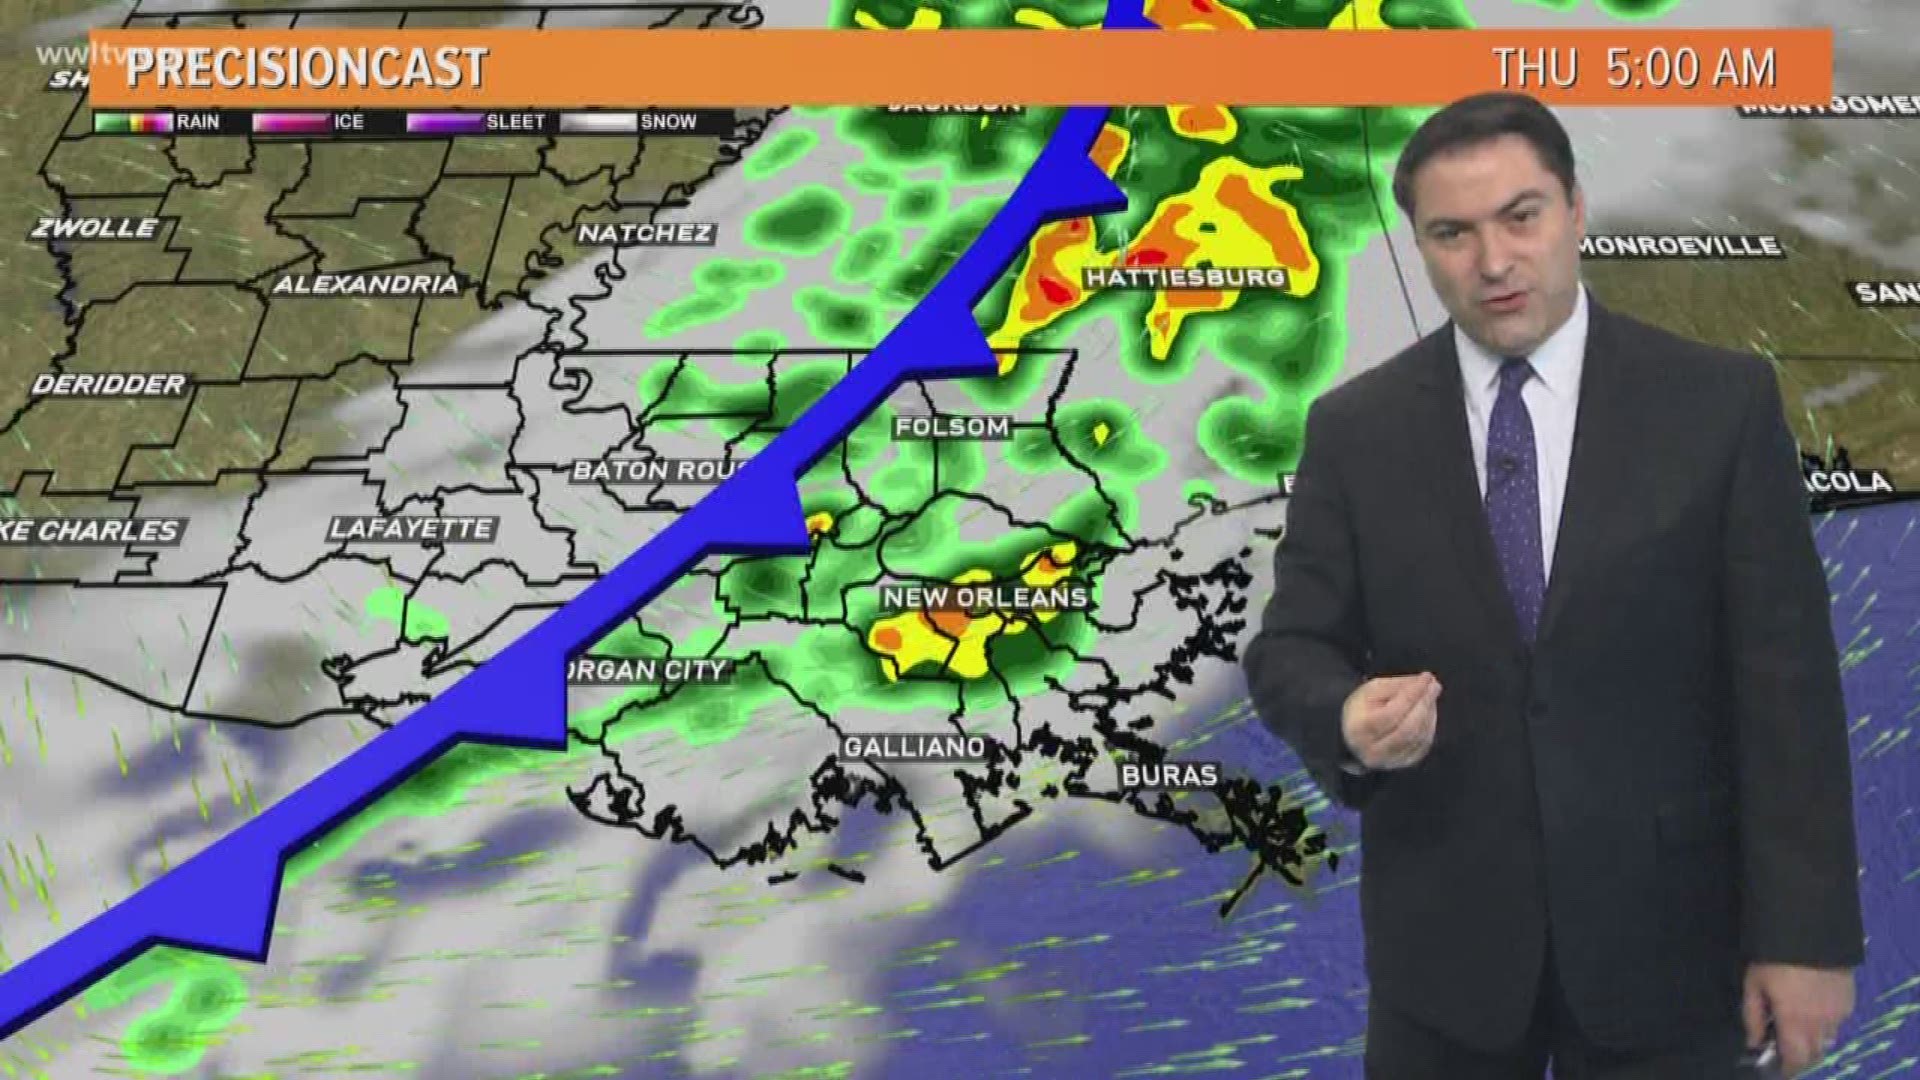 Meteorologist Dave Nussbaum says it will be a sunny and warm day with rain returning on Thursday Morning.